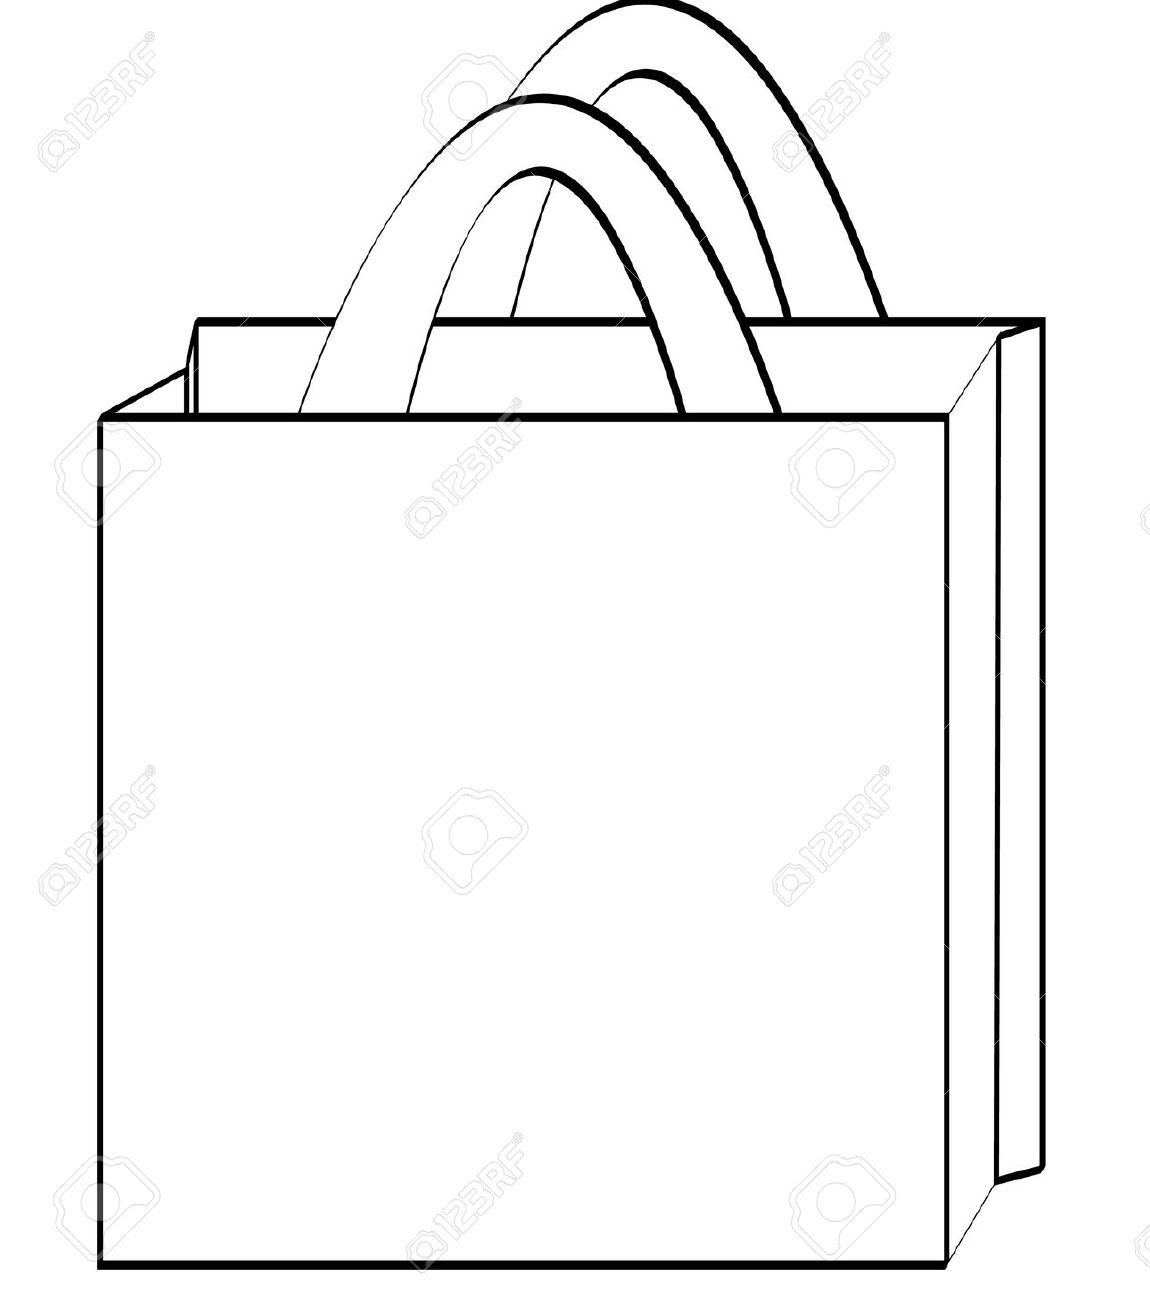 Bag Clipart Black And White Free | UMD College of Information Studies STICK